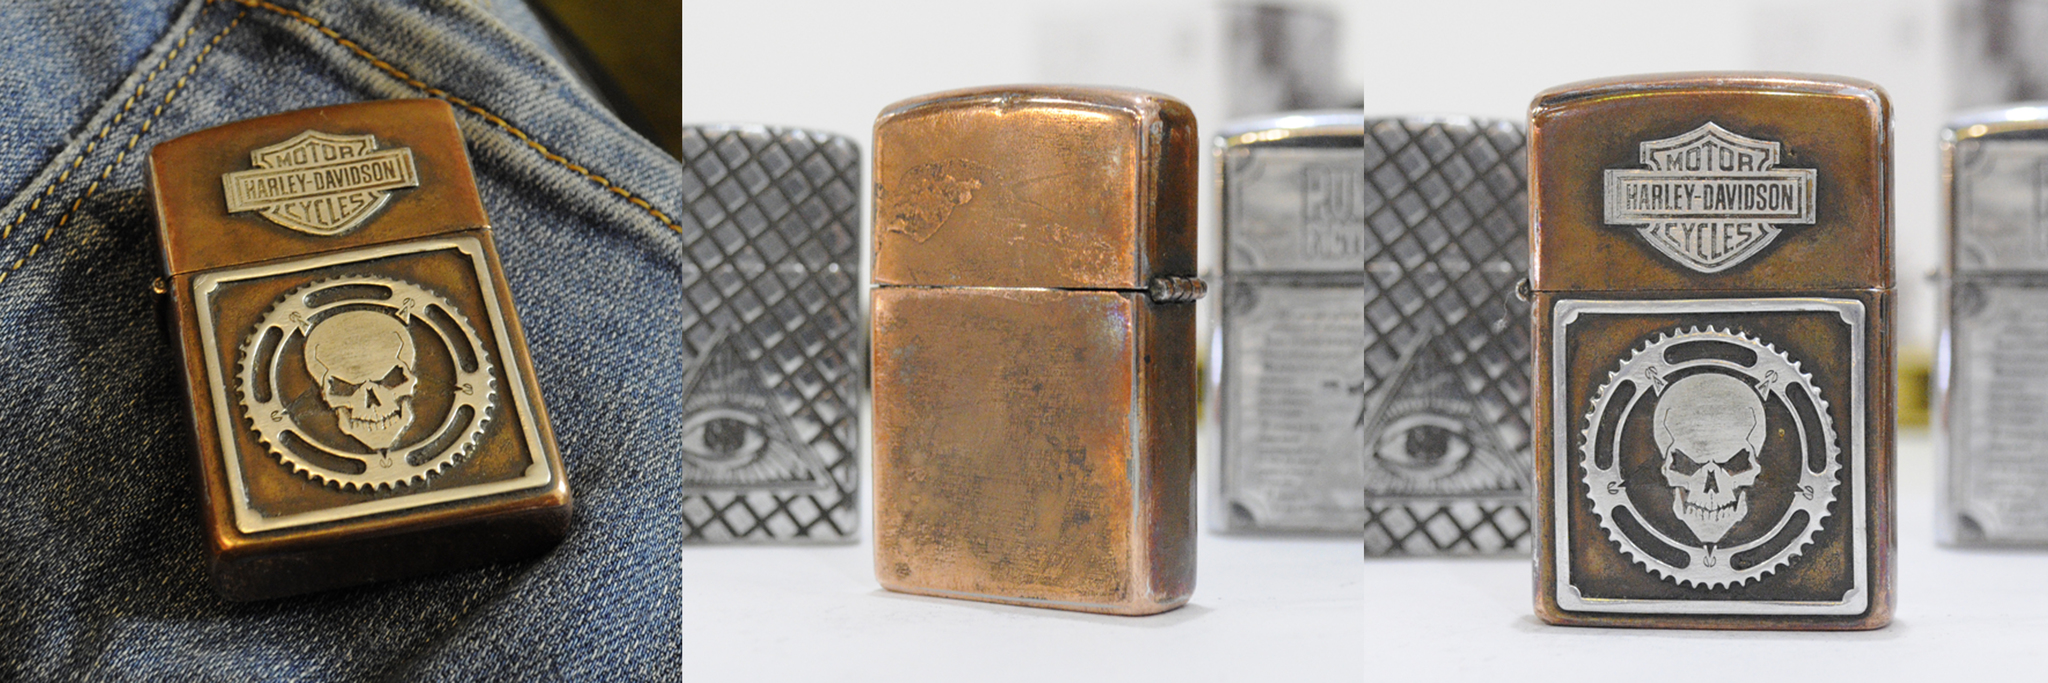 Just lighters - My, Zippo, Zippo customization, Etching, Laser engraving, Copper plating, Gas lighter, Steampunk lighter, Dieselpunk, Steampunk, Crazy Max, Pulp Fuction, Pyramid, All-seeing eye, Friday tag is mine, Pulp Fiction, Longpost, Needlework without process